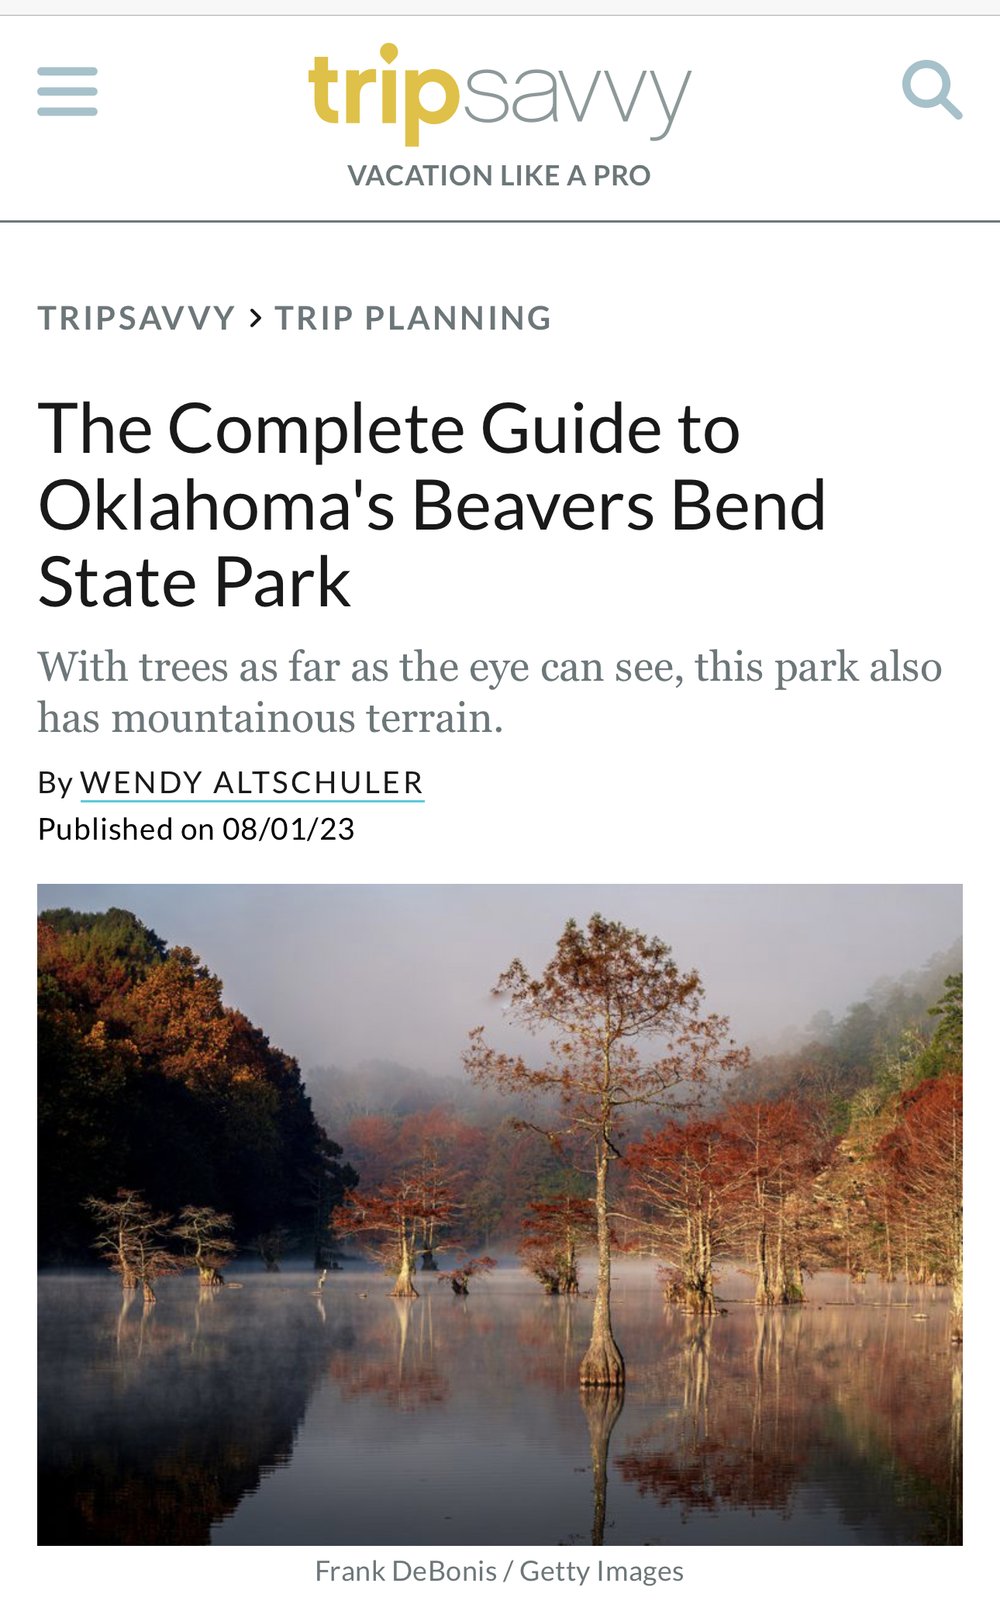 The Complete Guide to Oklahoma's Beavers Bend State Park